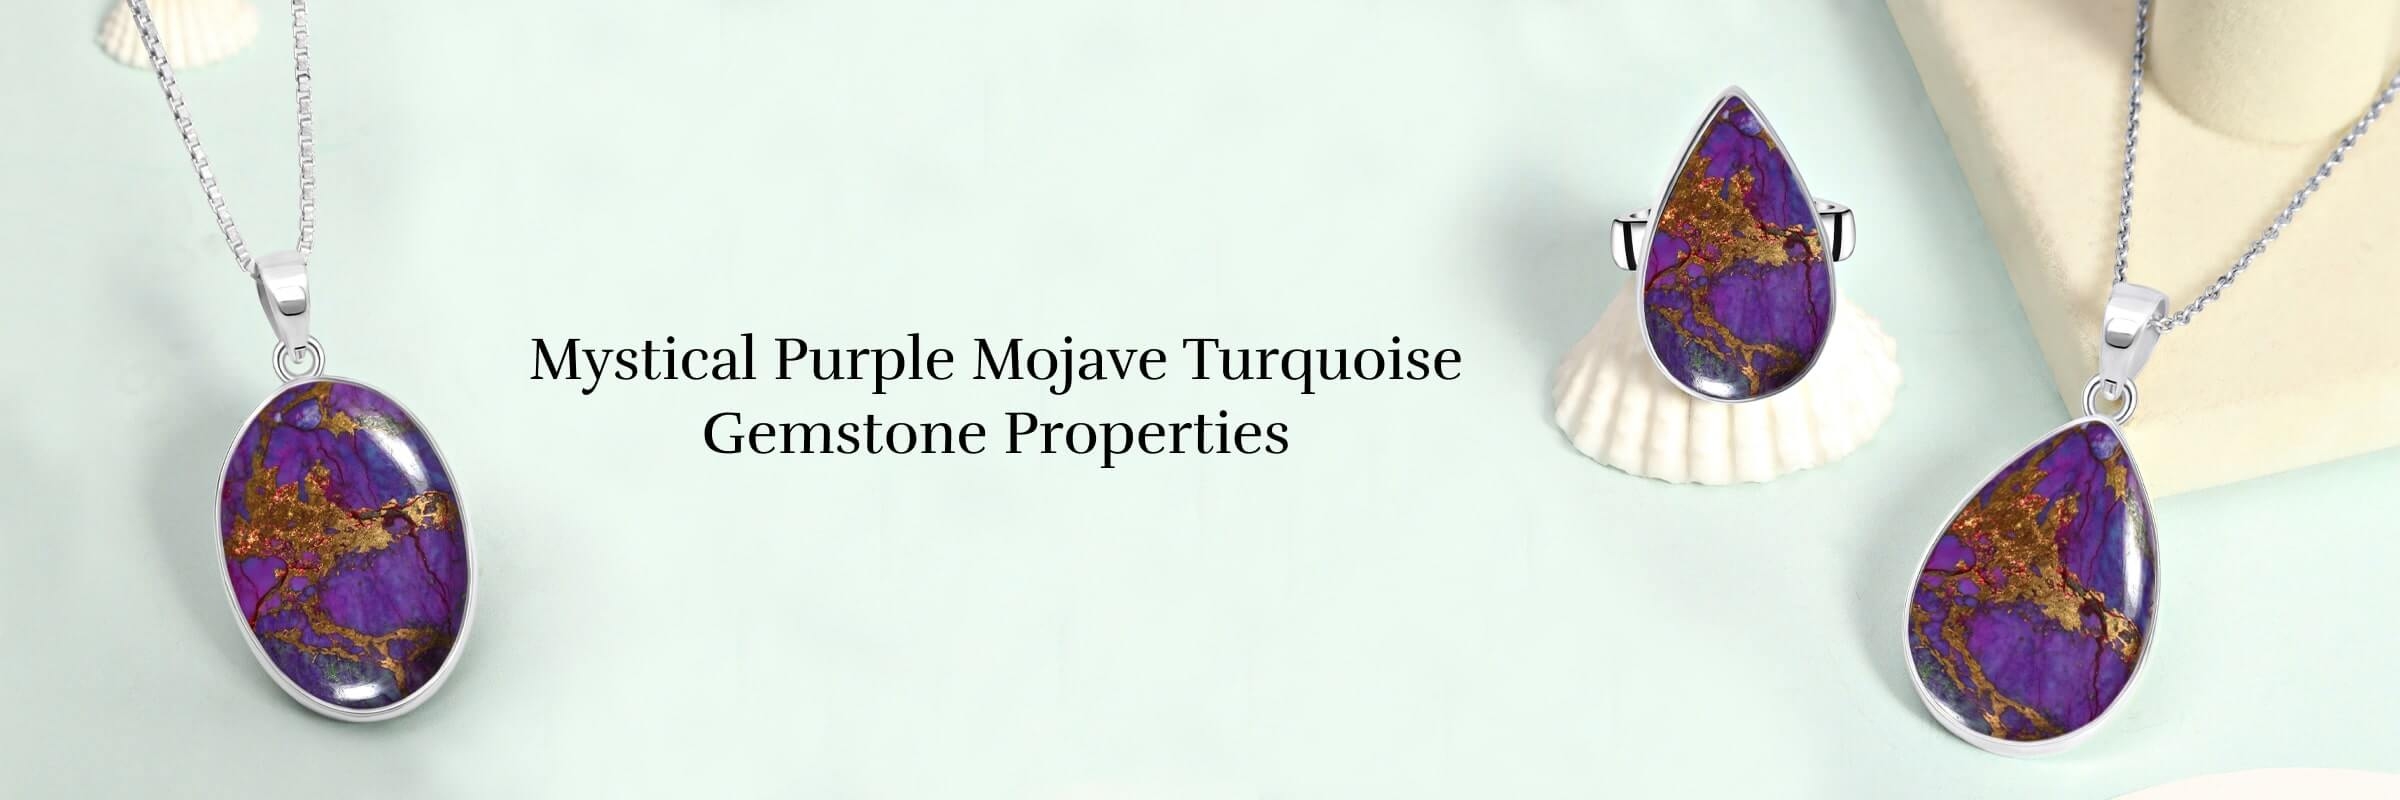 Physical Properties of Purple Mojave Turquoise Gemstone